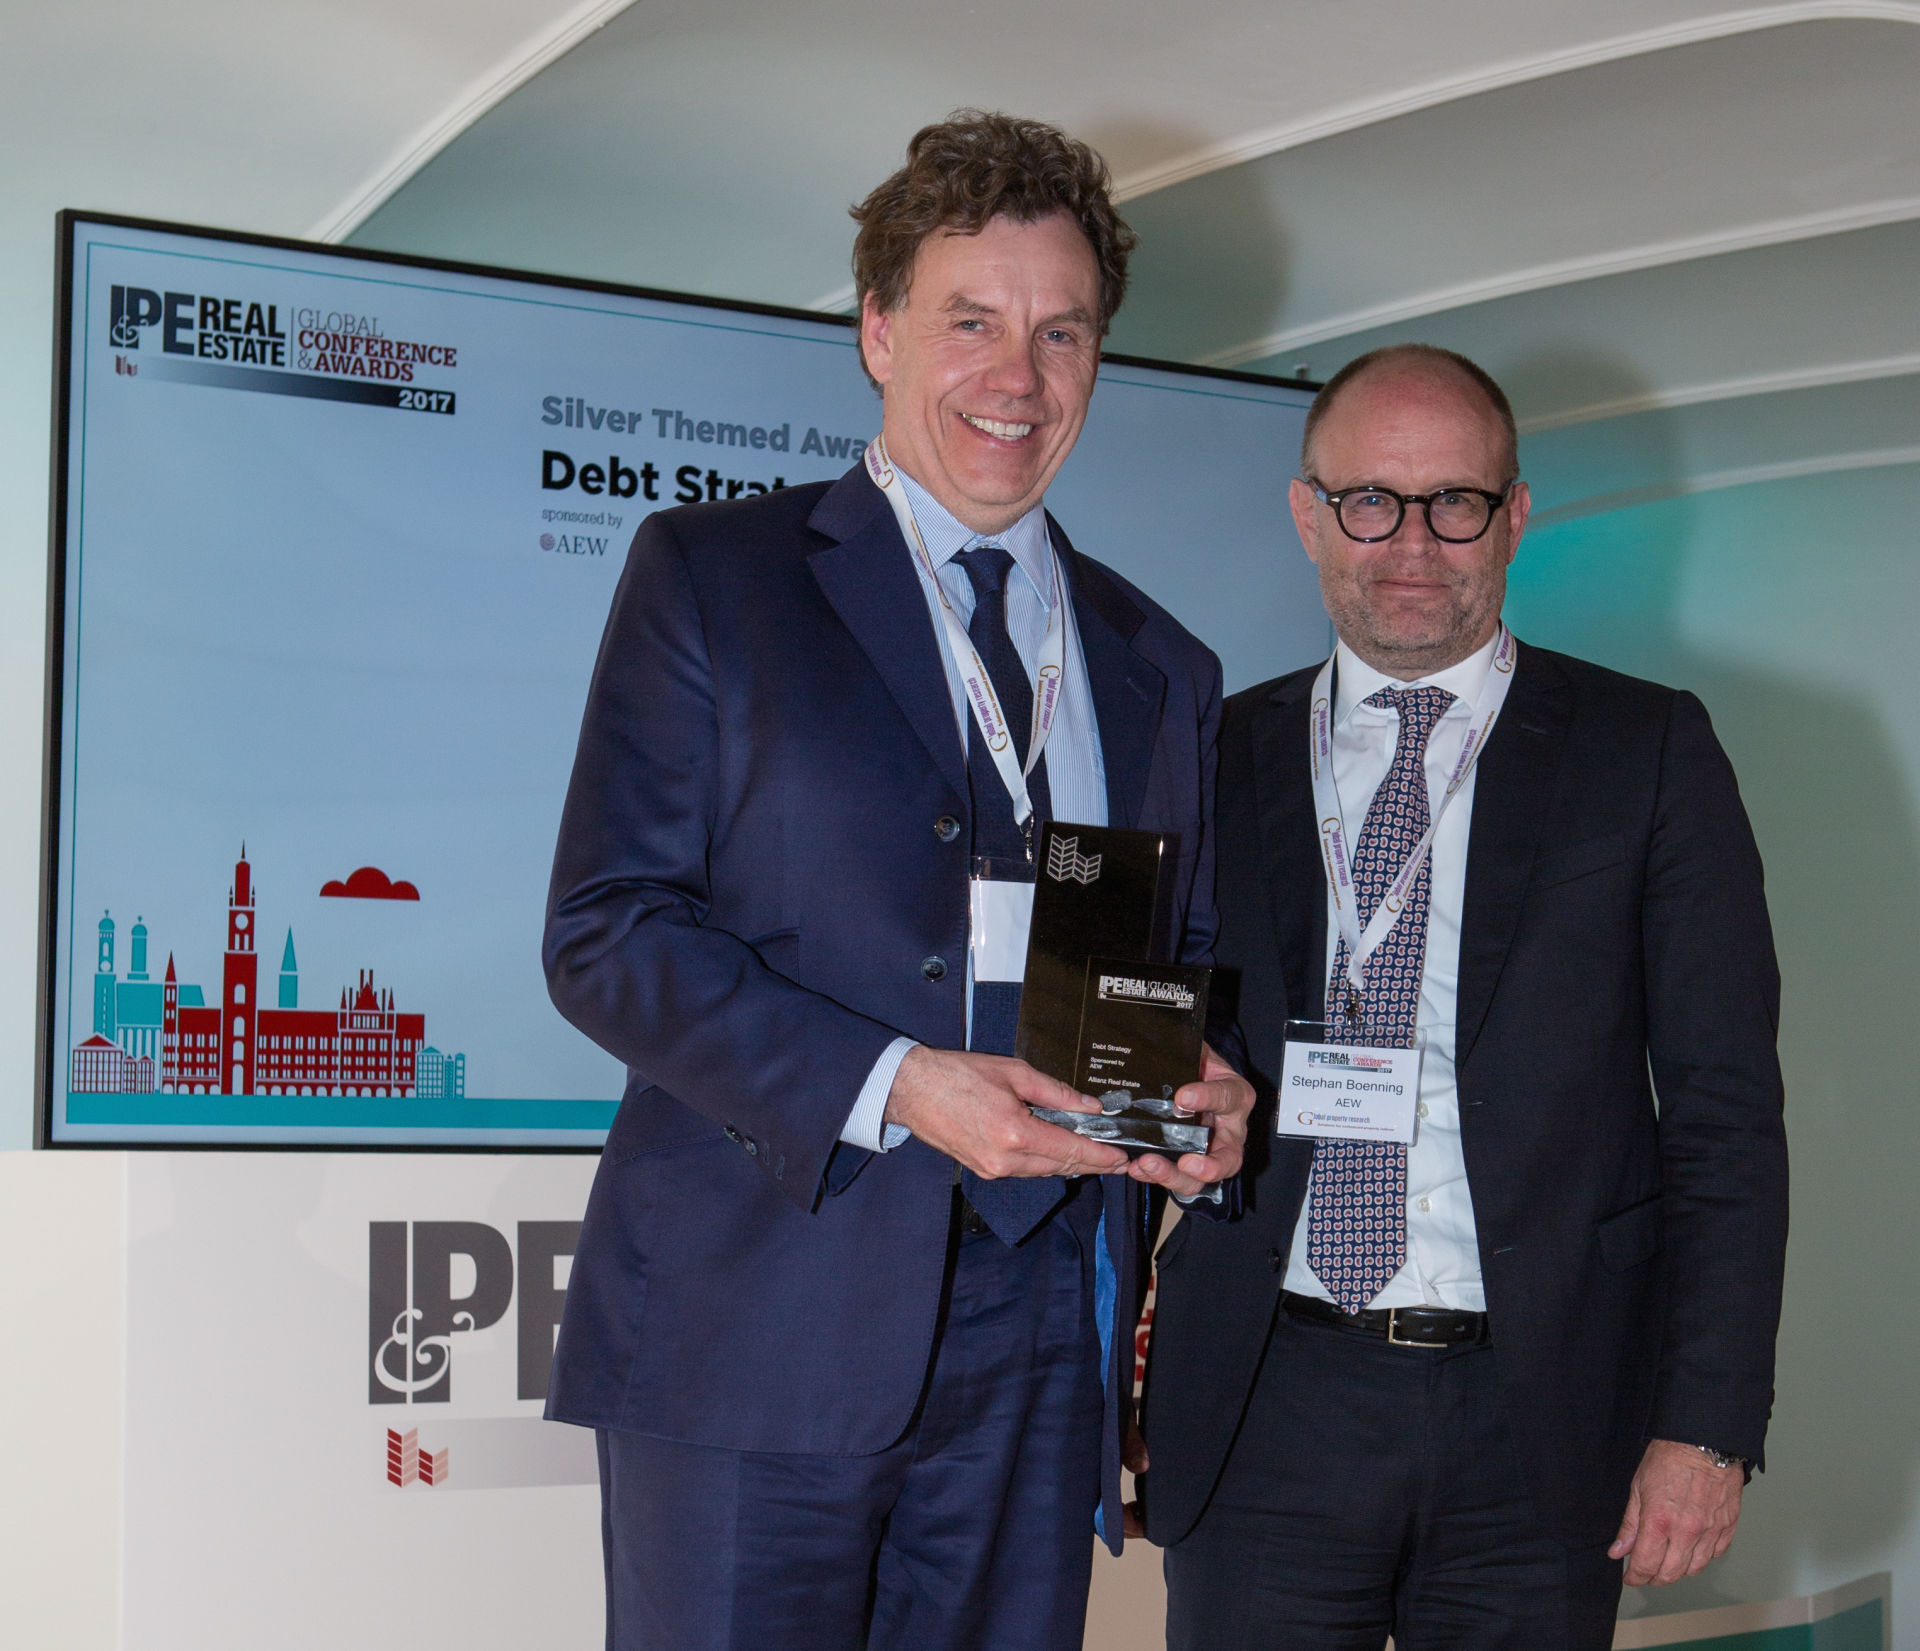 Roland Fuchs, Head of European real Estate Finance of ARE, receiving the IPE Award for Debt Strategy